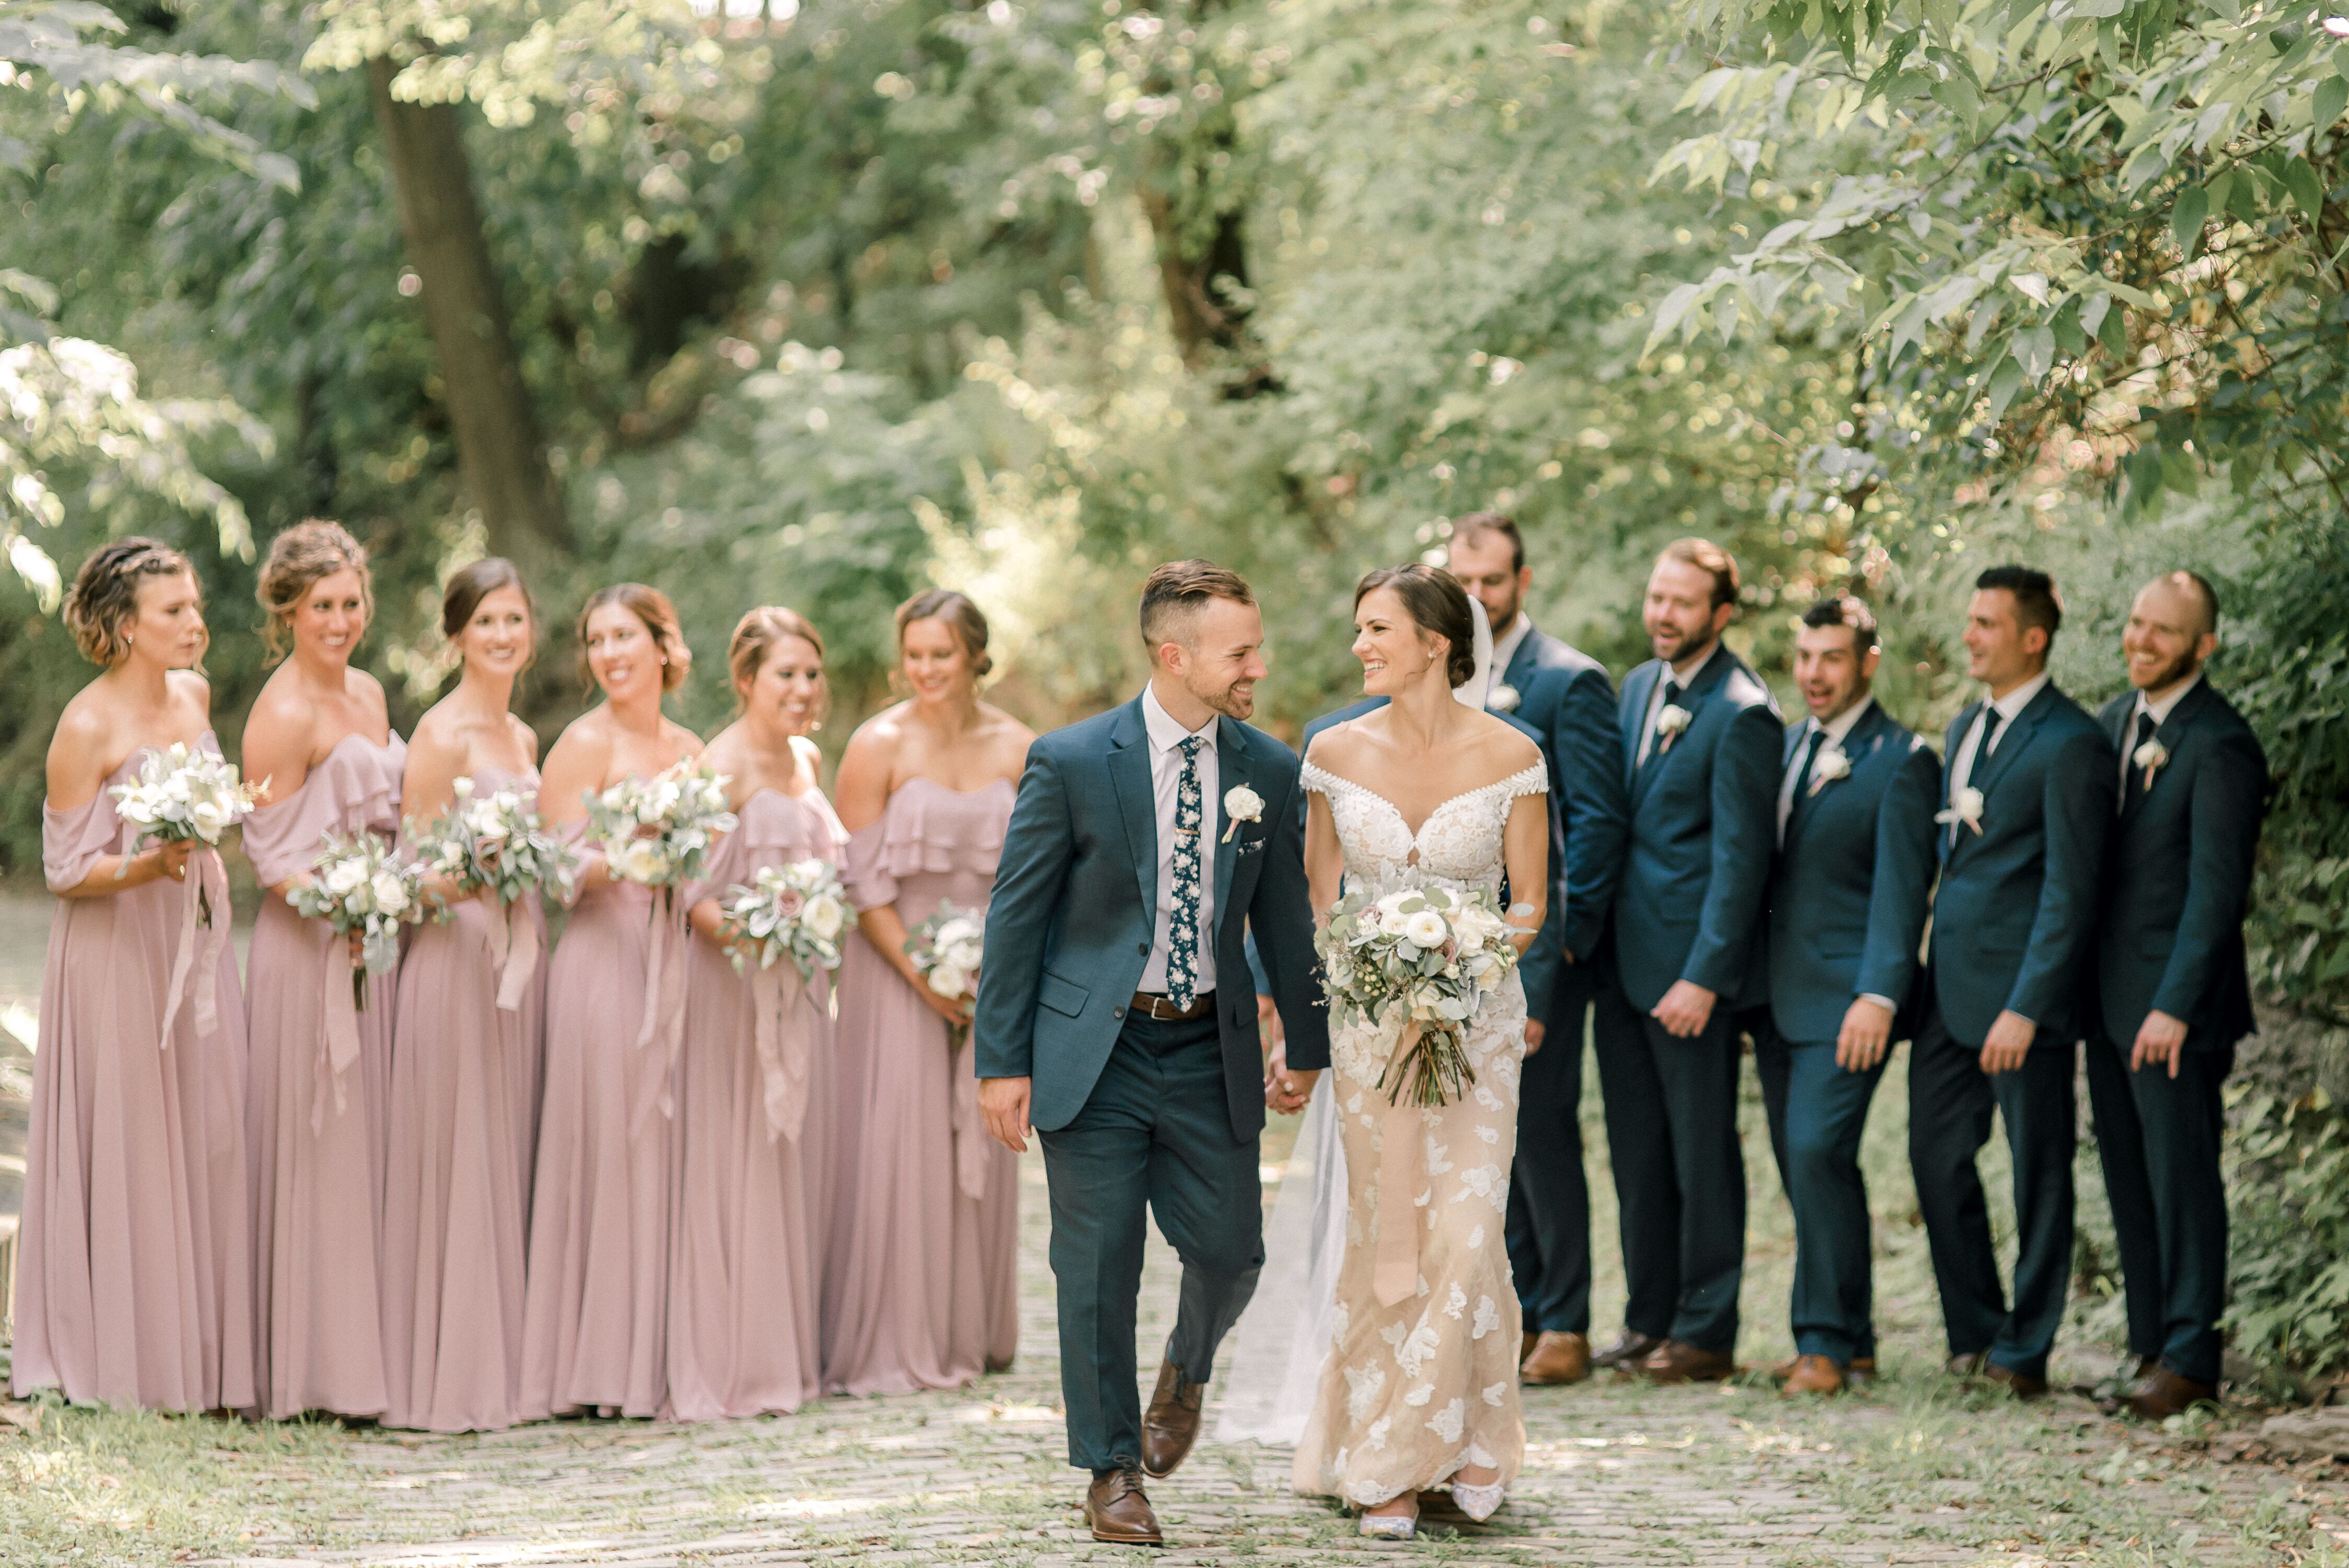 Rustic, Elegant Wedding Party with DustyPink Dresses and Navy Suits